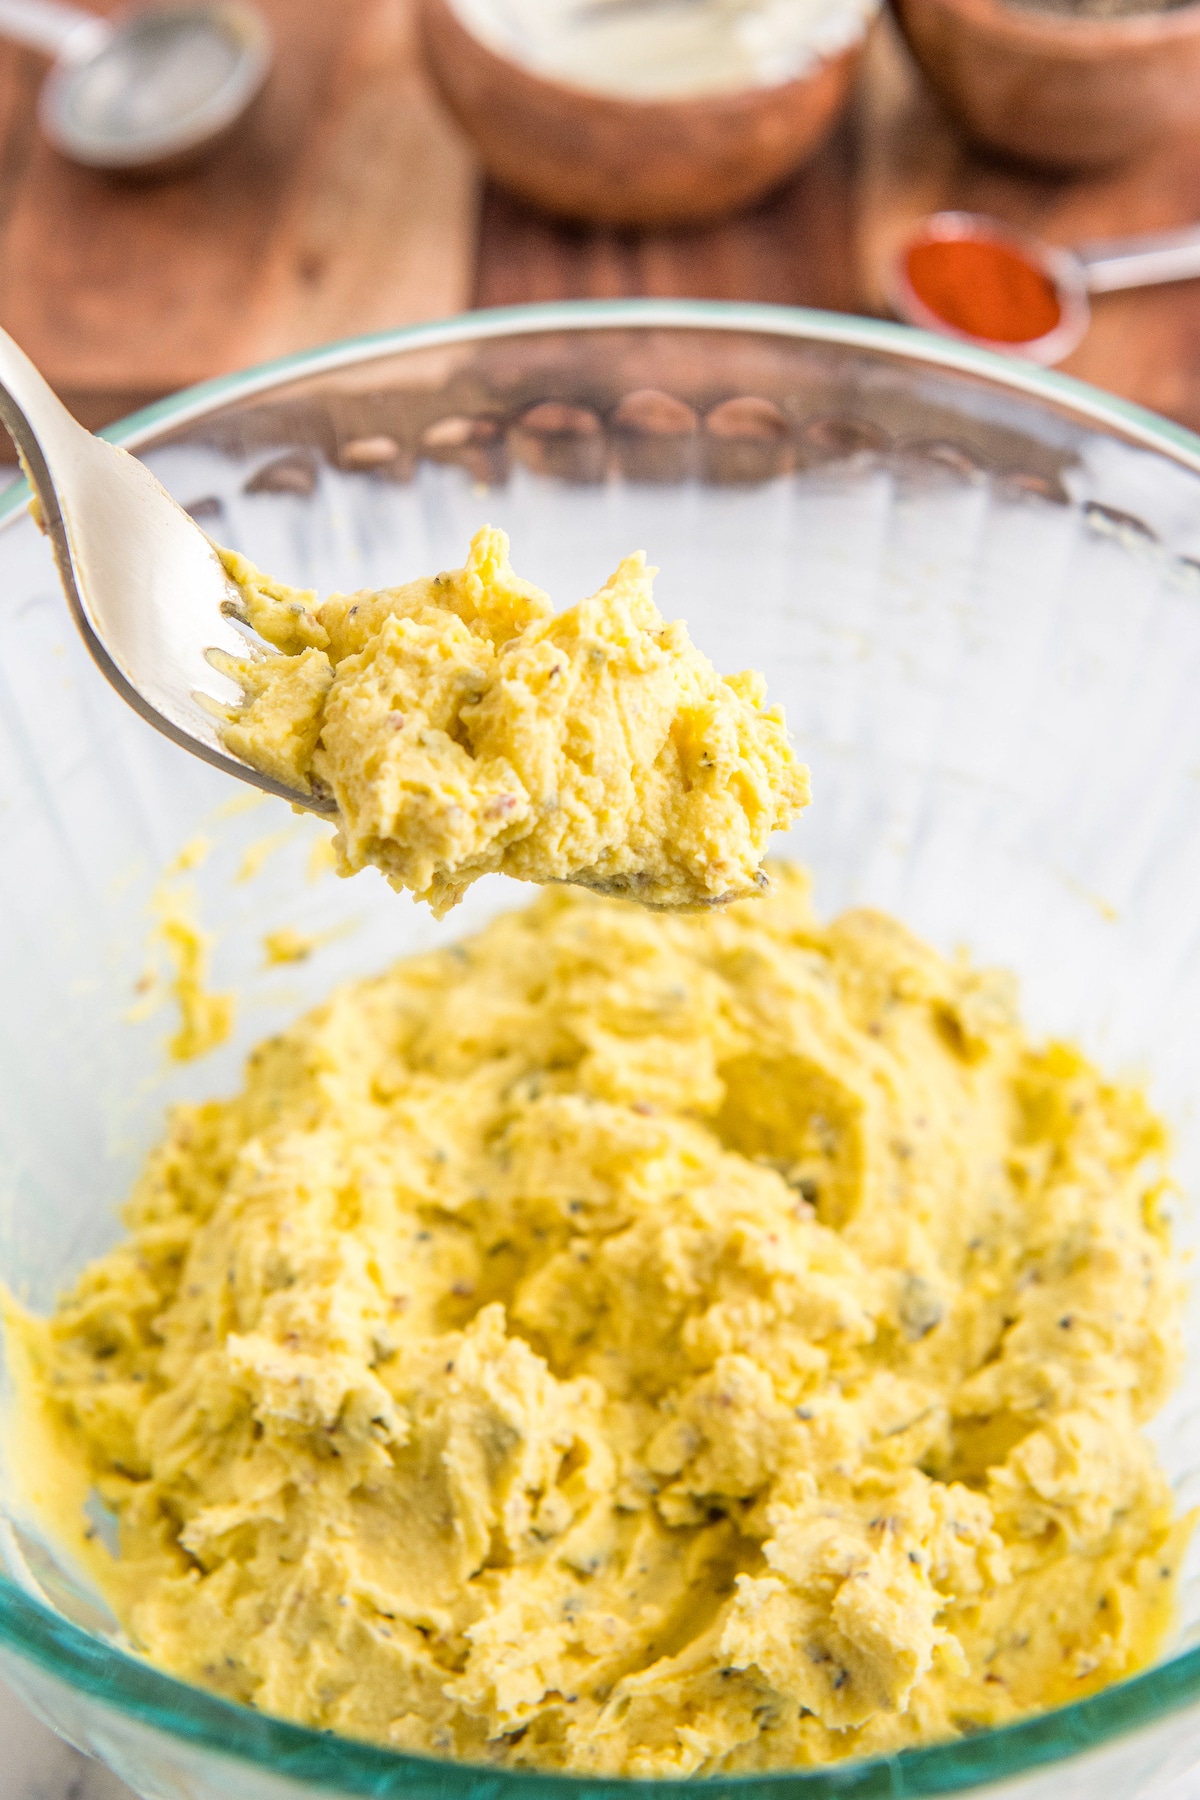 Filling of mashed egg yolks, relish, mayo and seasonings all mixed together in a bowl with a fork.